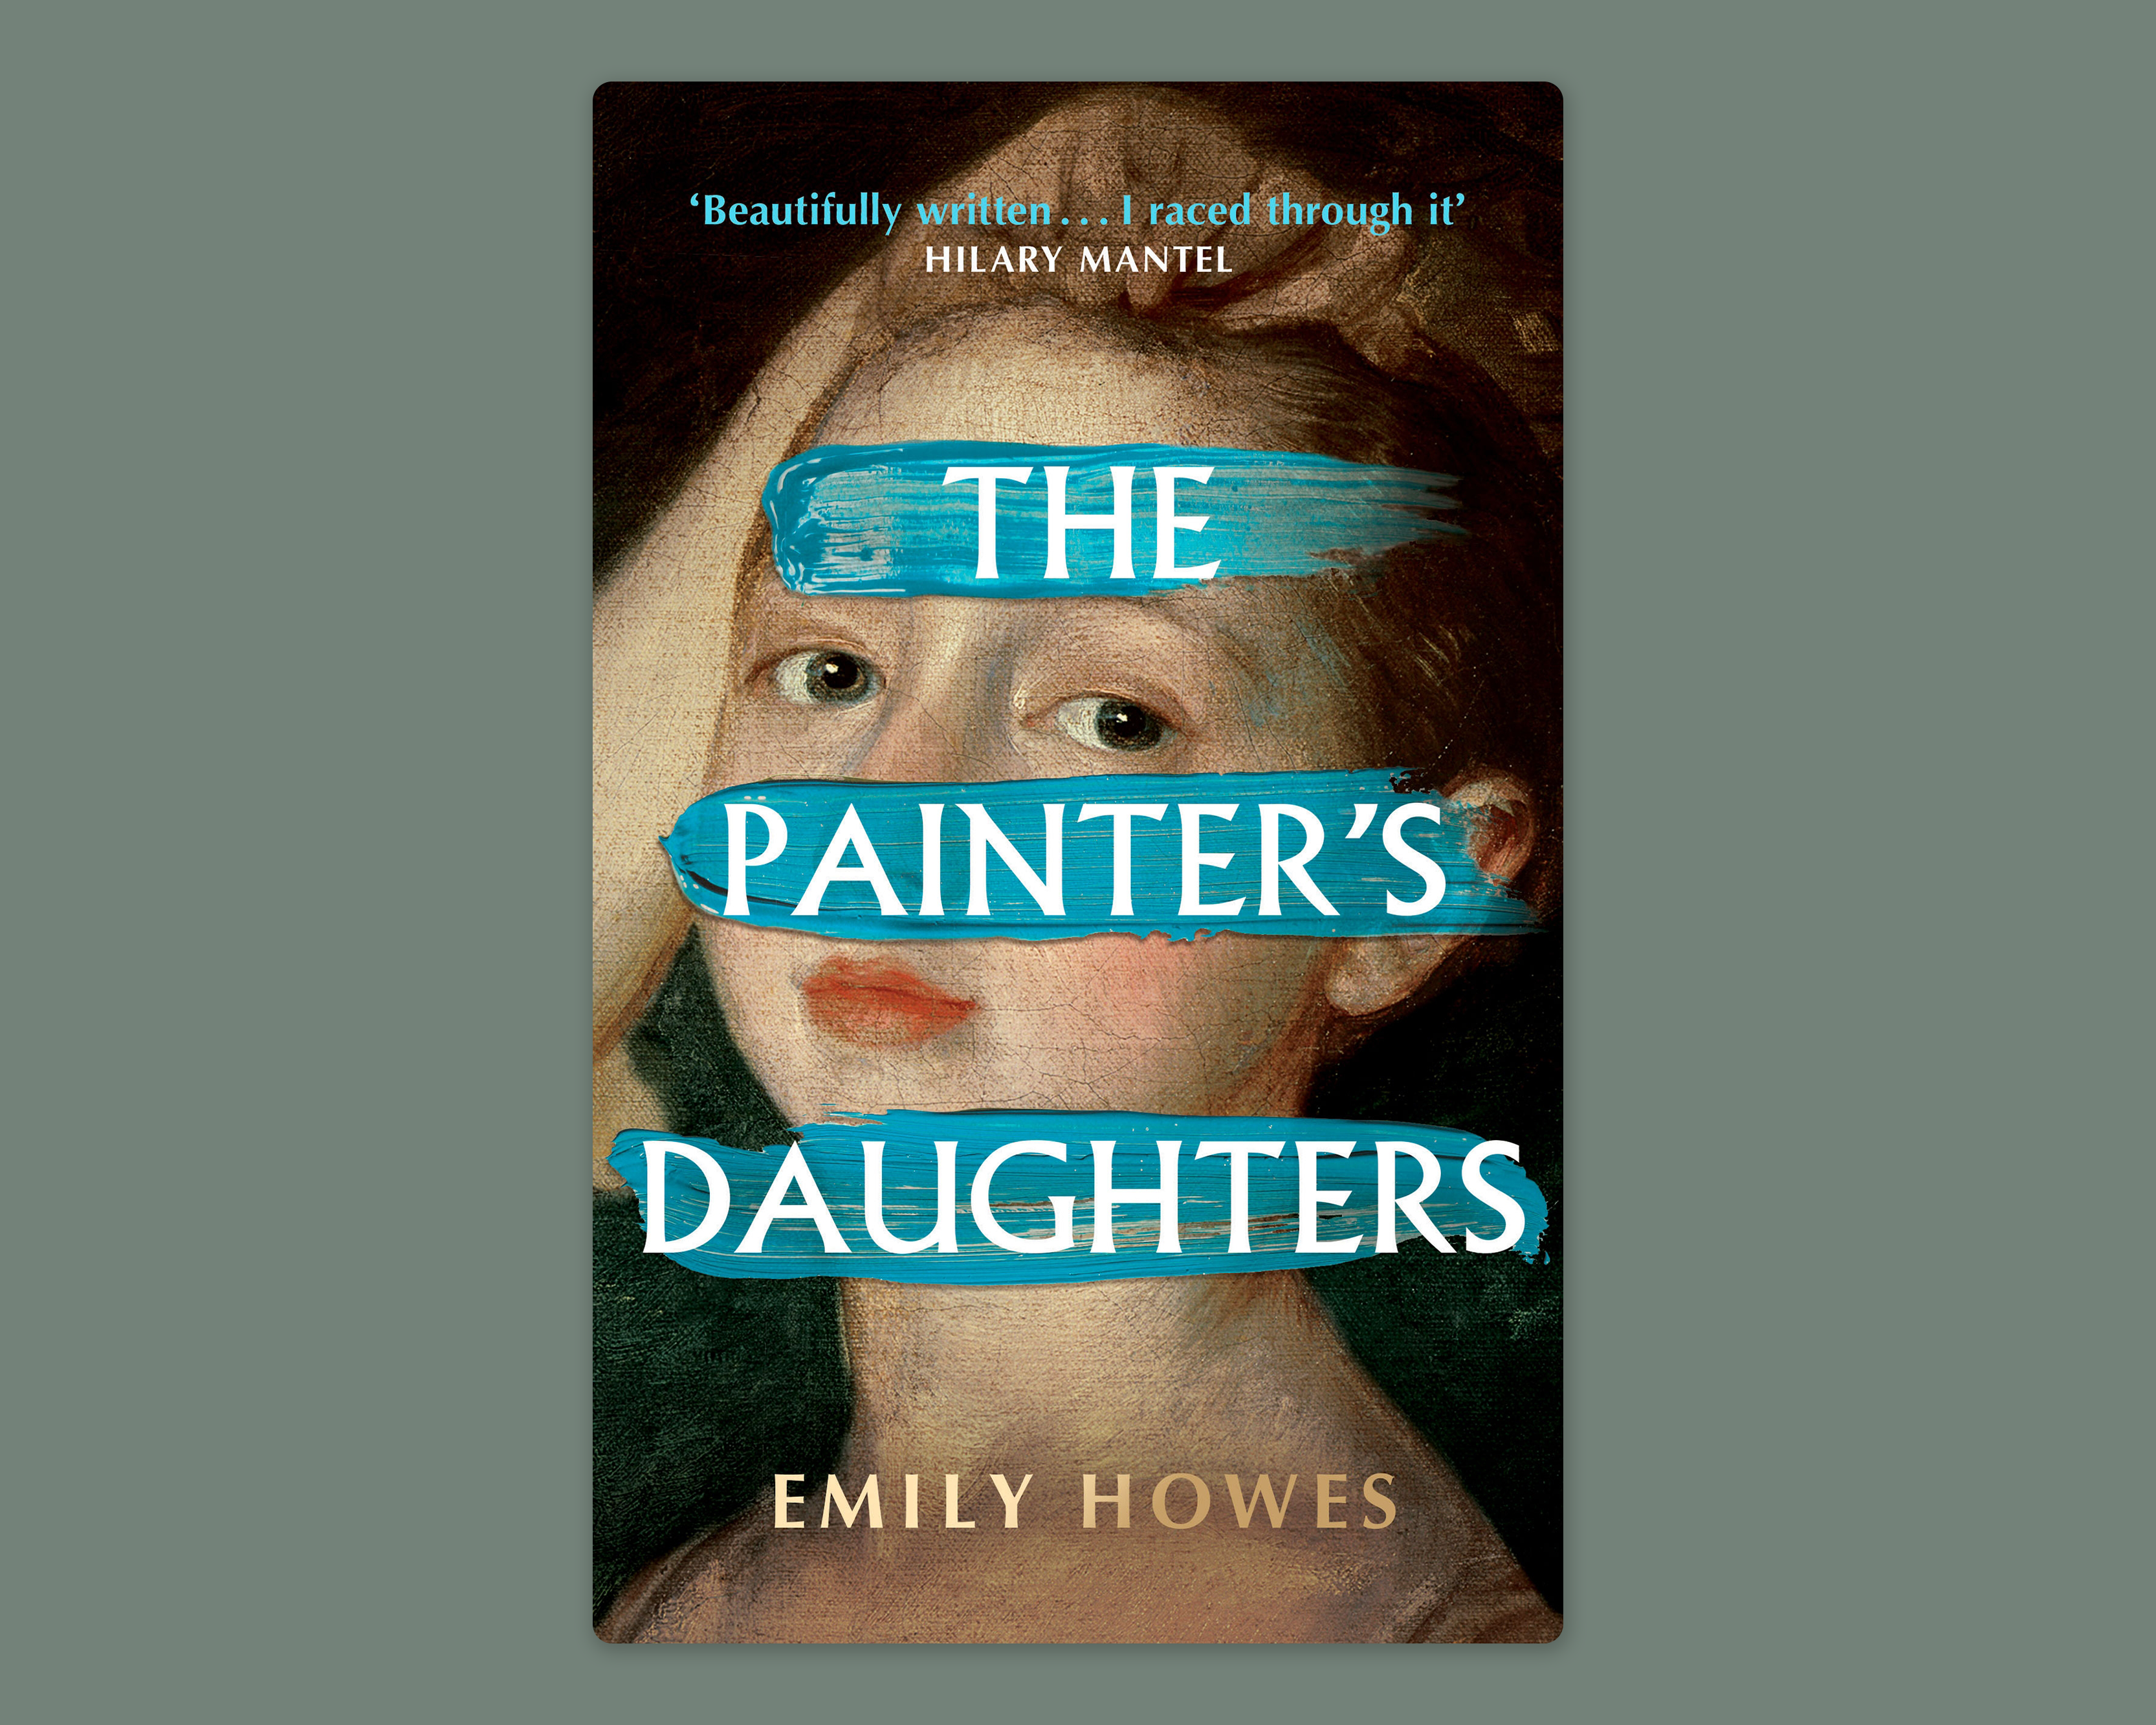 An image of the book cover The Painter's Daughters by Emily Howes. The cover image is overlayed on a green background.